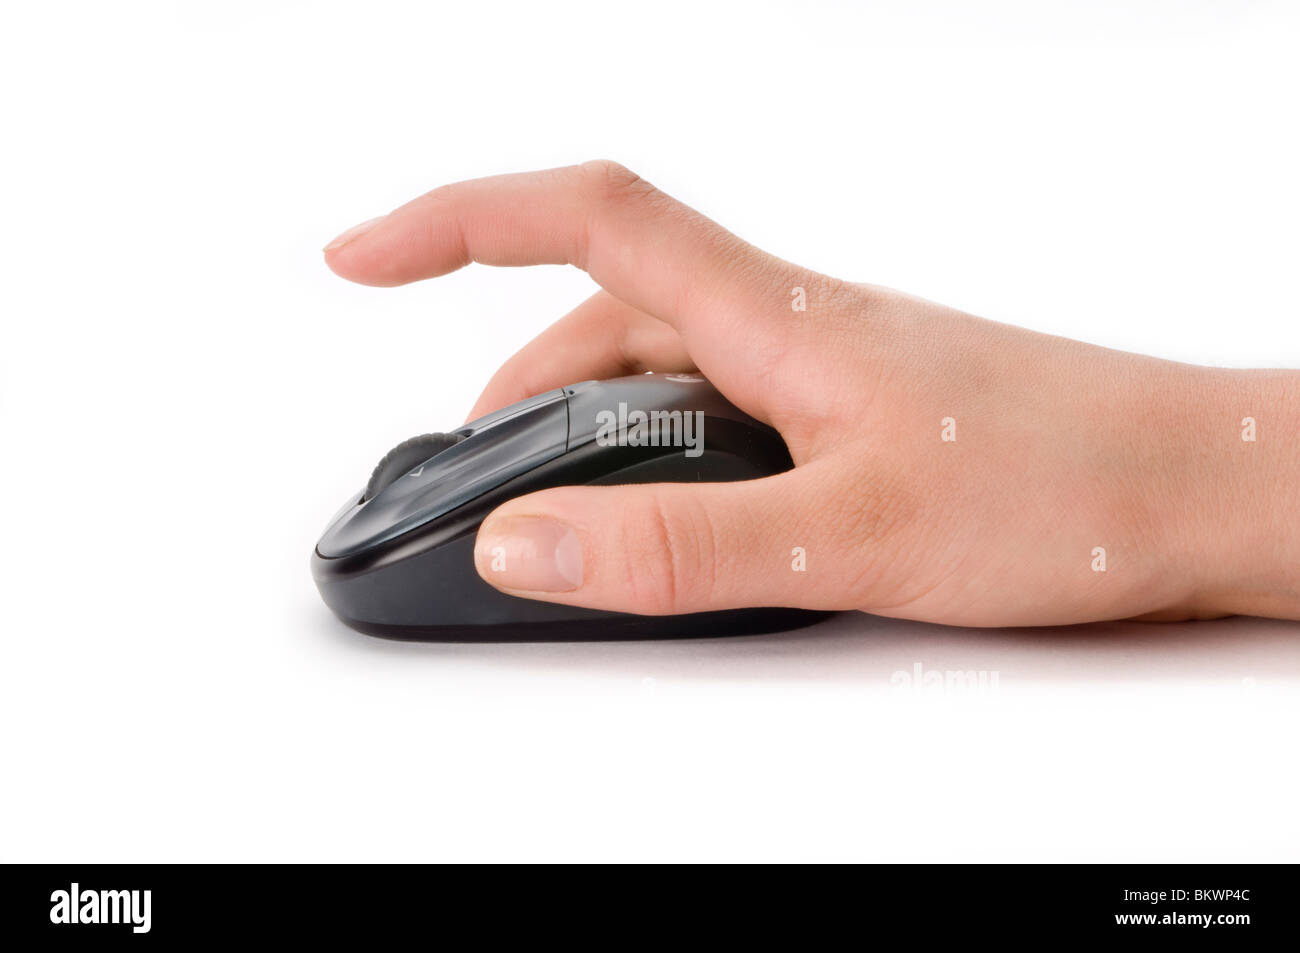 hand holding computer mouse clicking Stock Photo - Alamy